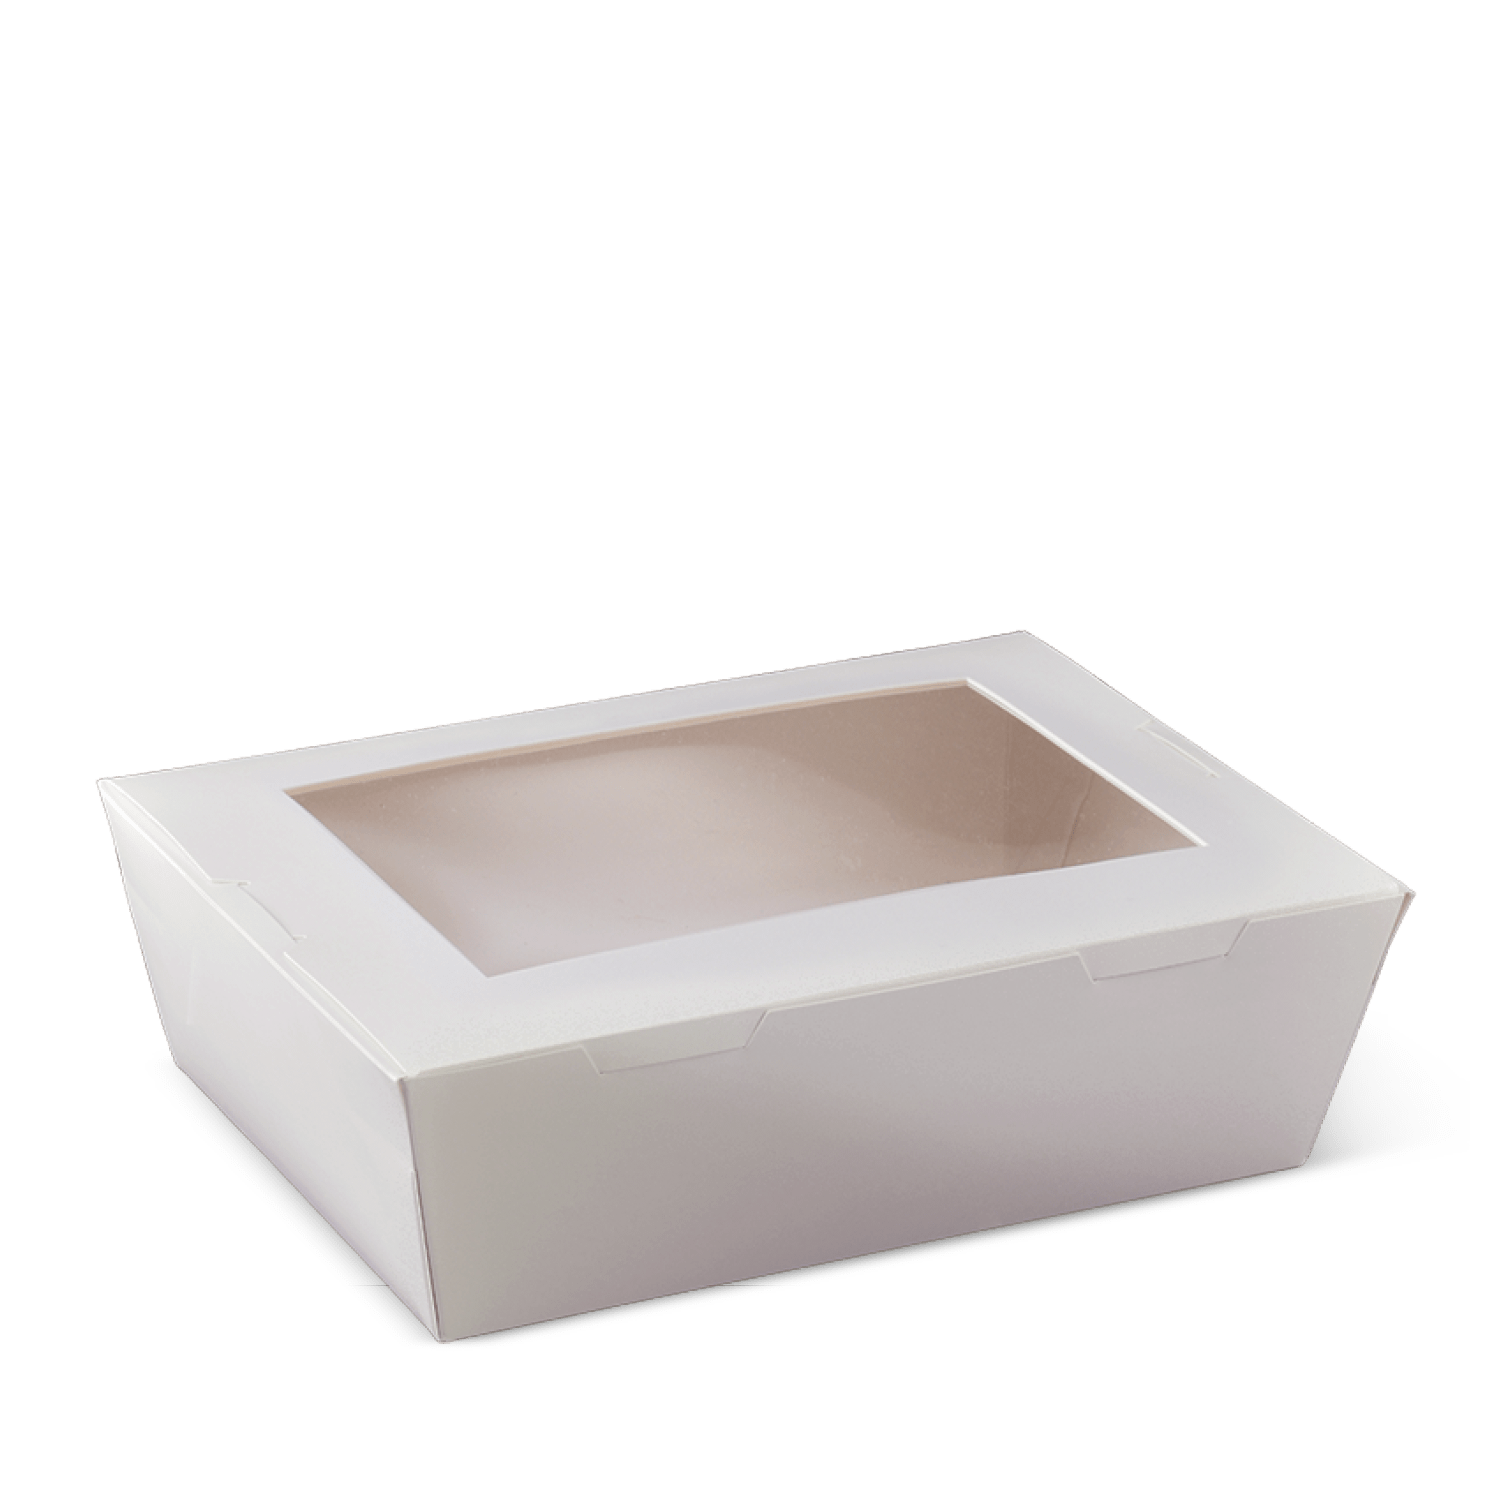 EXTRA SMALL WINDOW LUNCH BOX